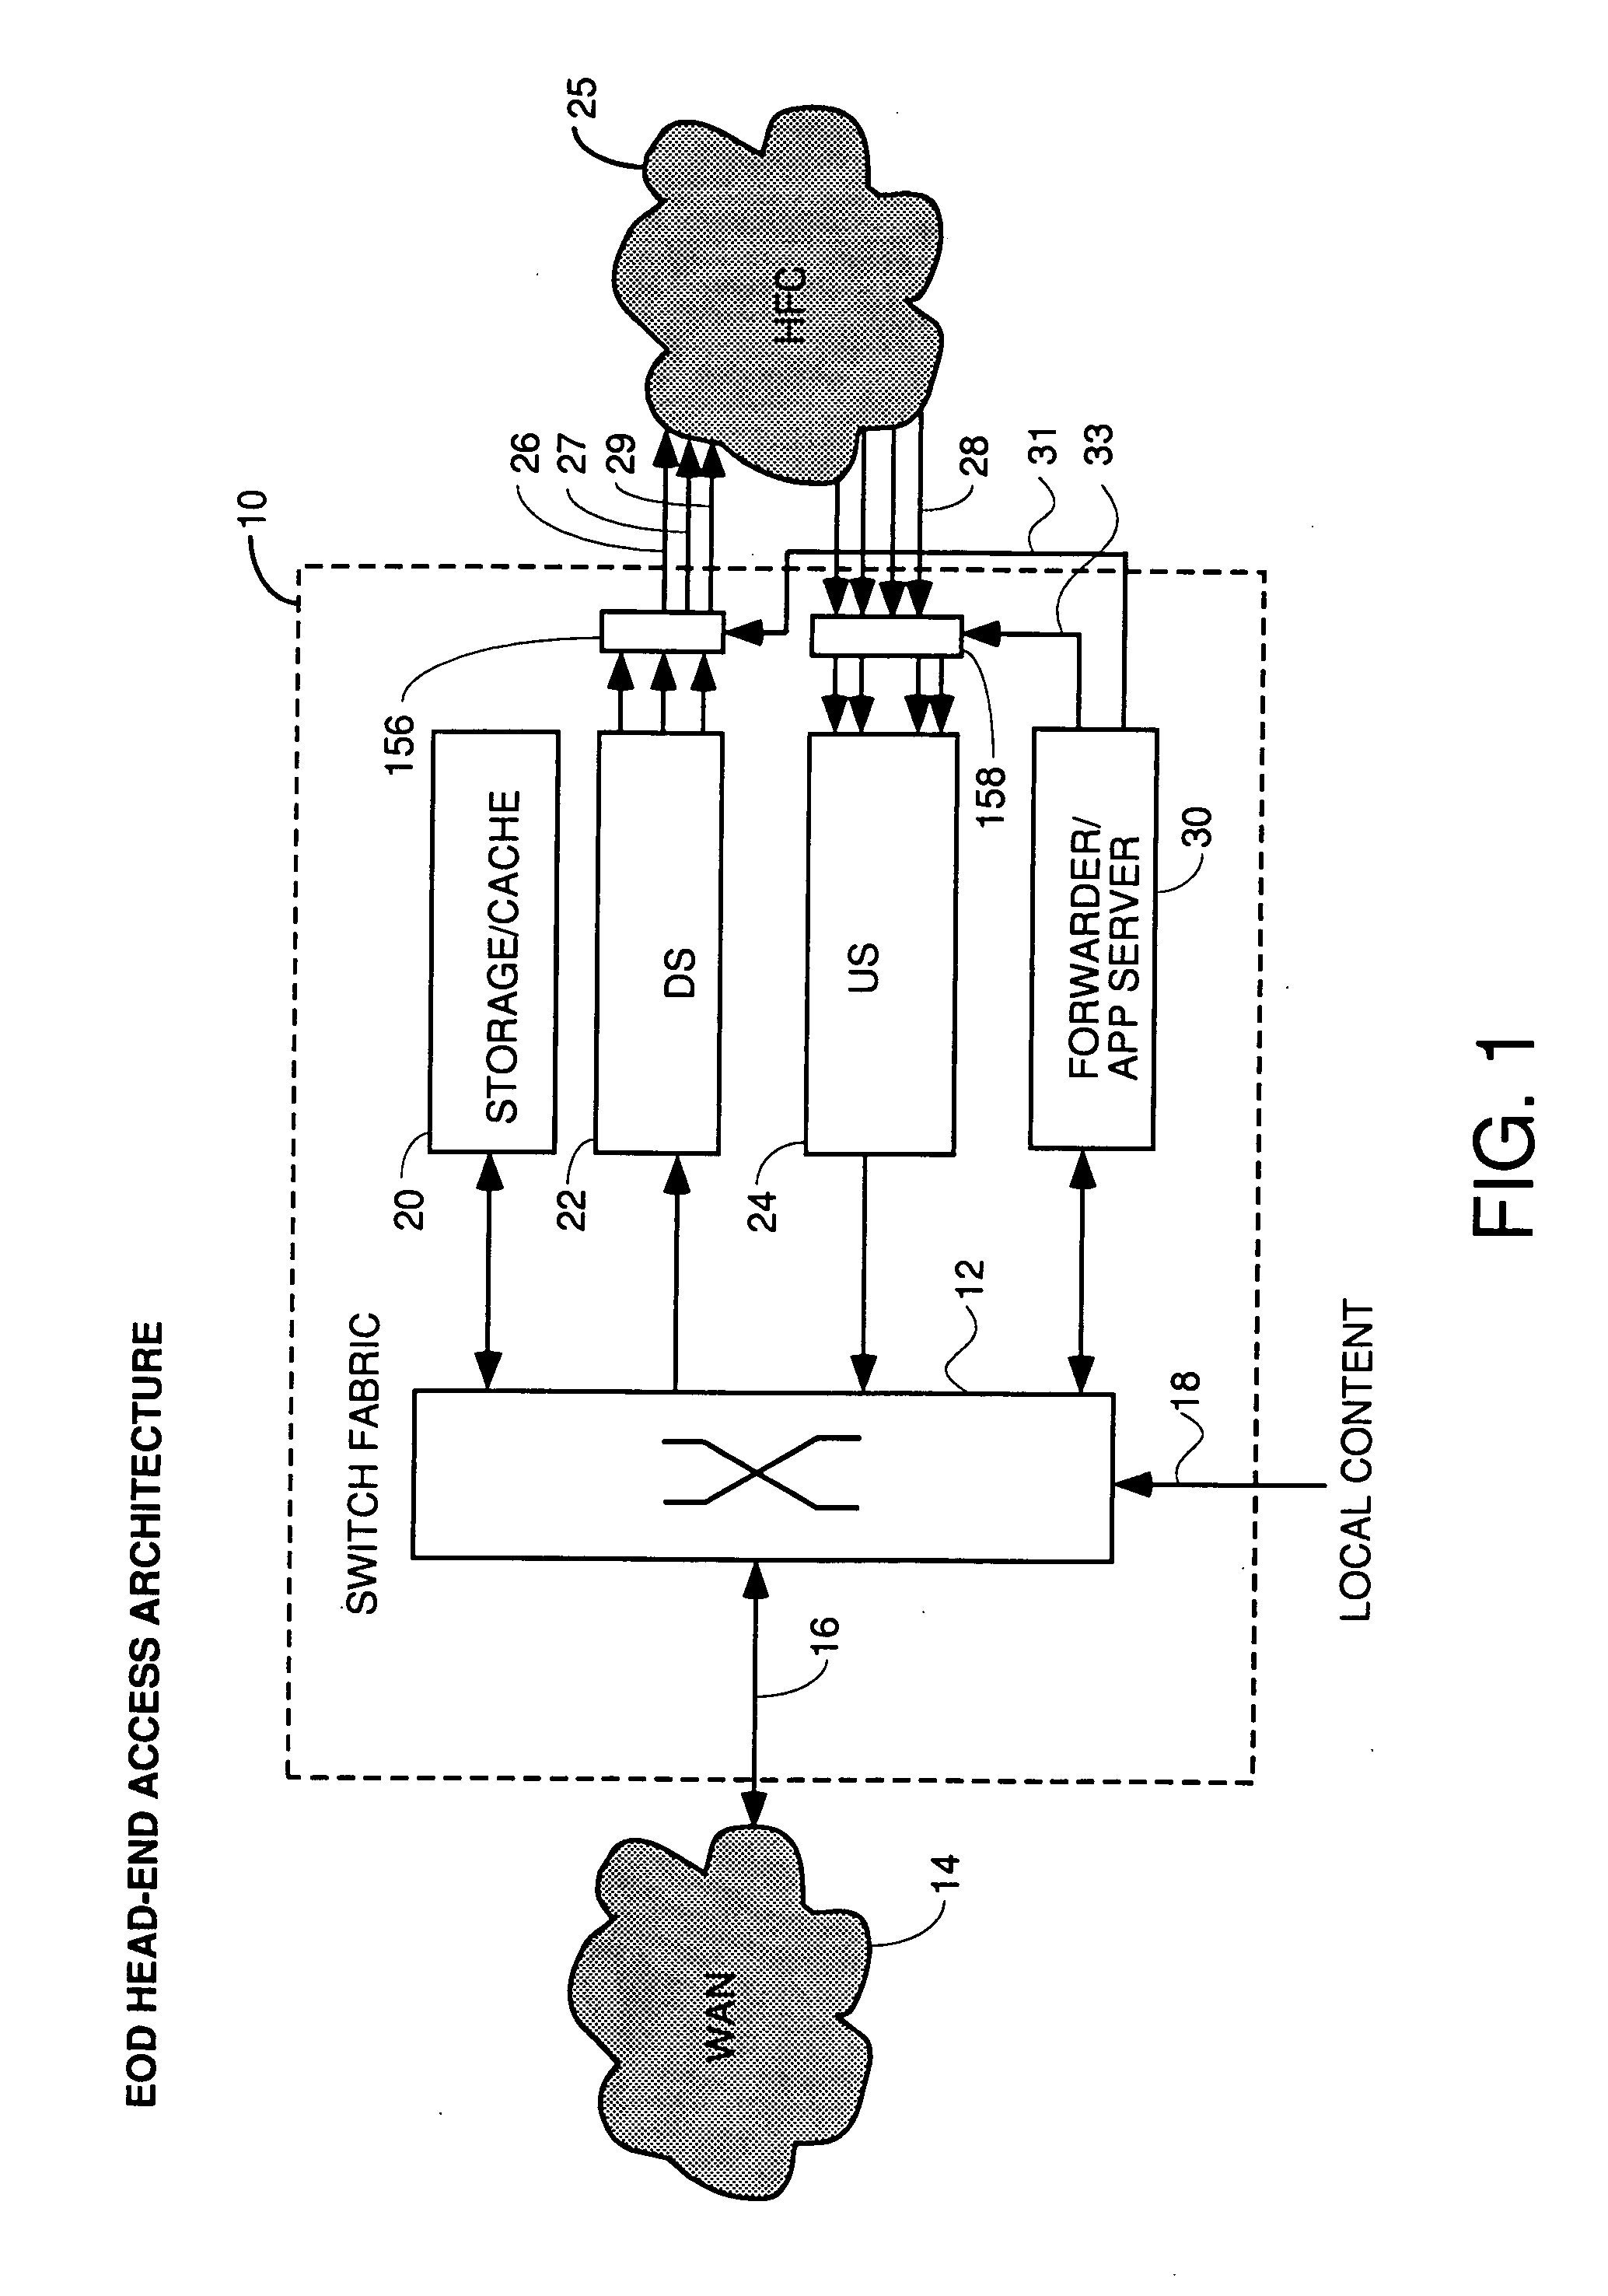 Purification and recovery of fluids in processing applications